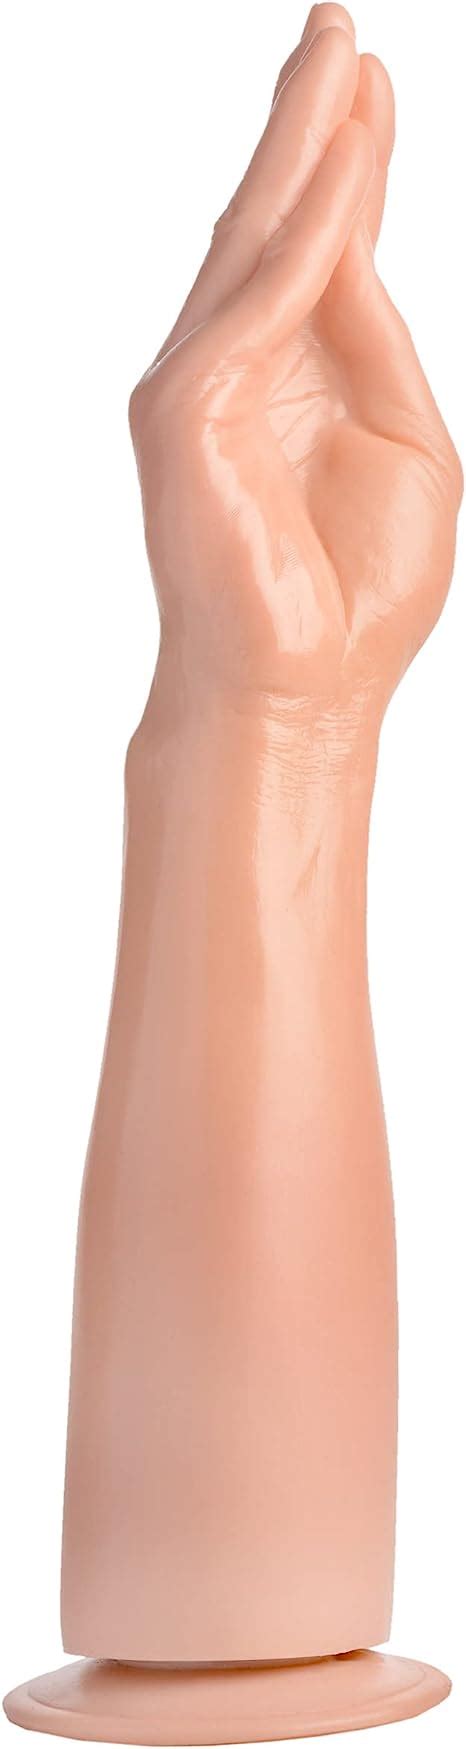 Amazon The Fister Hand and Forearm Dildo Master Series スタンダード